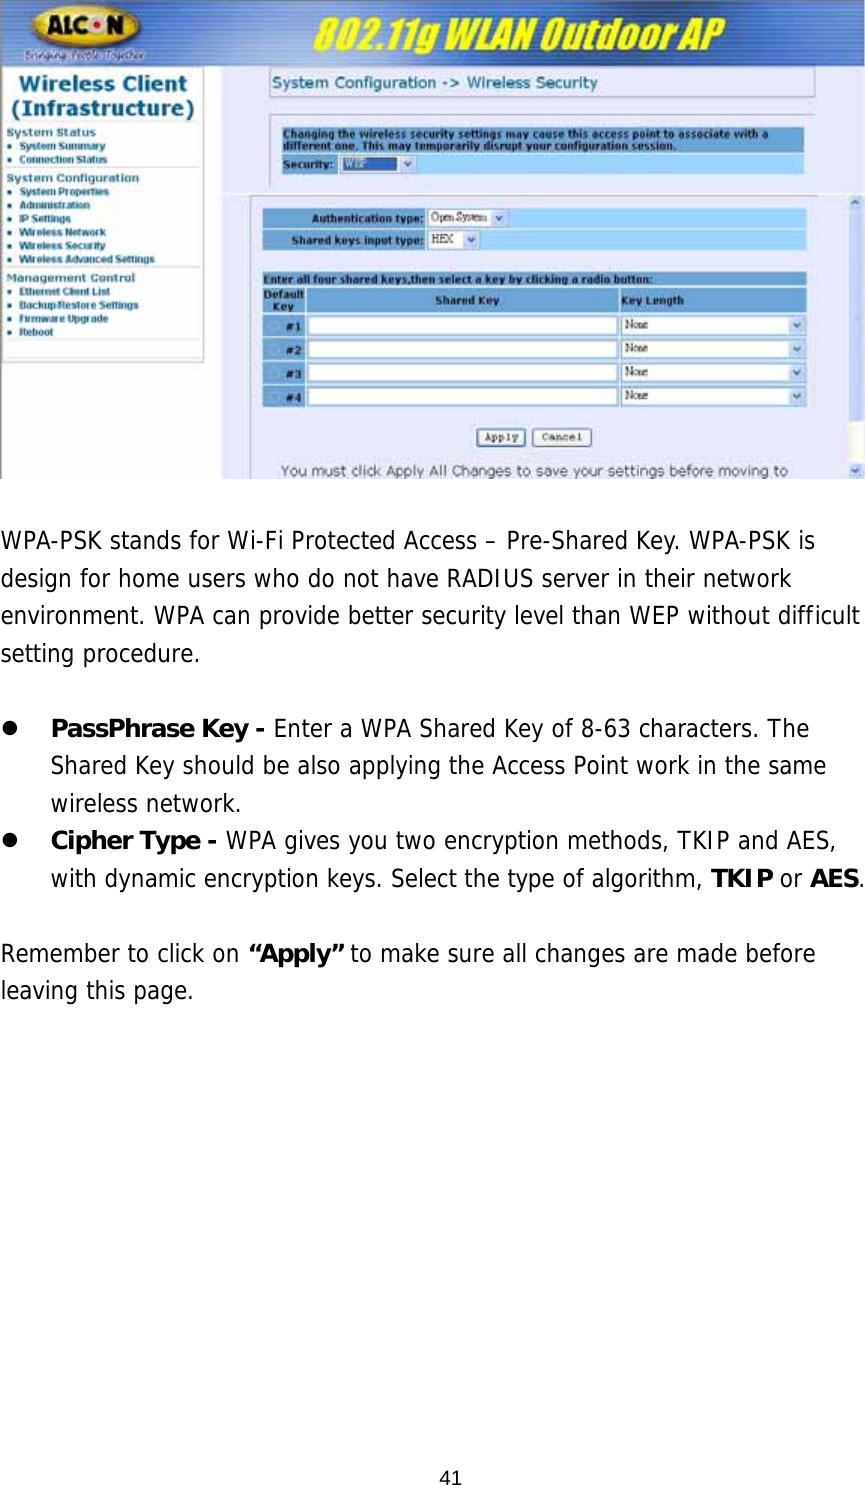   WPA-PSK stands for Wi-Fi Protected Access – Pre-Shared Key. WPA-PSK is design for home users who do not have RADIUS server in their network environment. WPA can provide better security level than WEP without difficult setting procedure.  z PassPhrase Key - Enter a WPA Shared Key of 8-63 characters. The Shared Key should be also applying the Access Point work in the same wireless network. z Cipher Type - WPA gives you two encryption methods, TKIP and AES, with dynamic encryption keys. Select the type of algorithm, TKIP or AES.   Remember to click on “Apply” to make sure all changes are made before leaving this page.    41